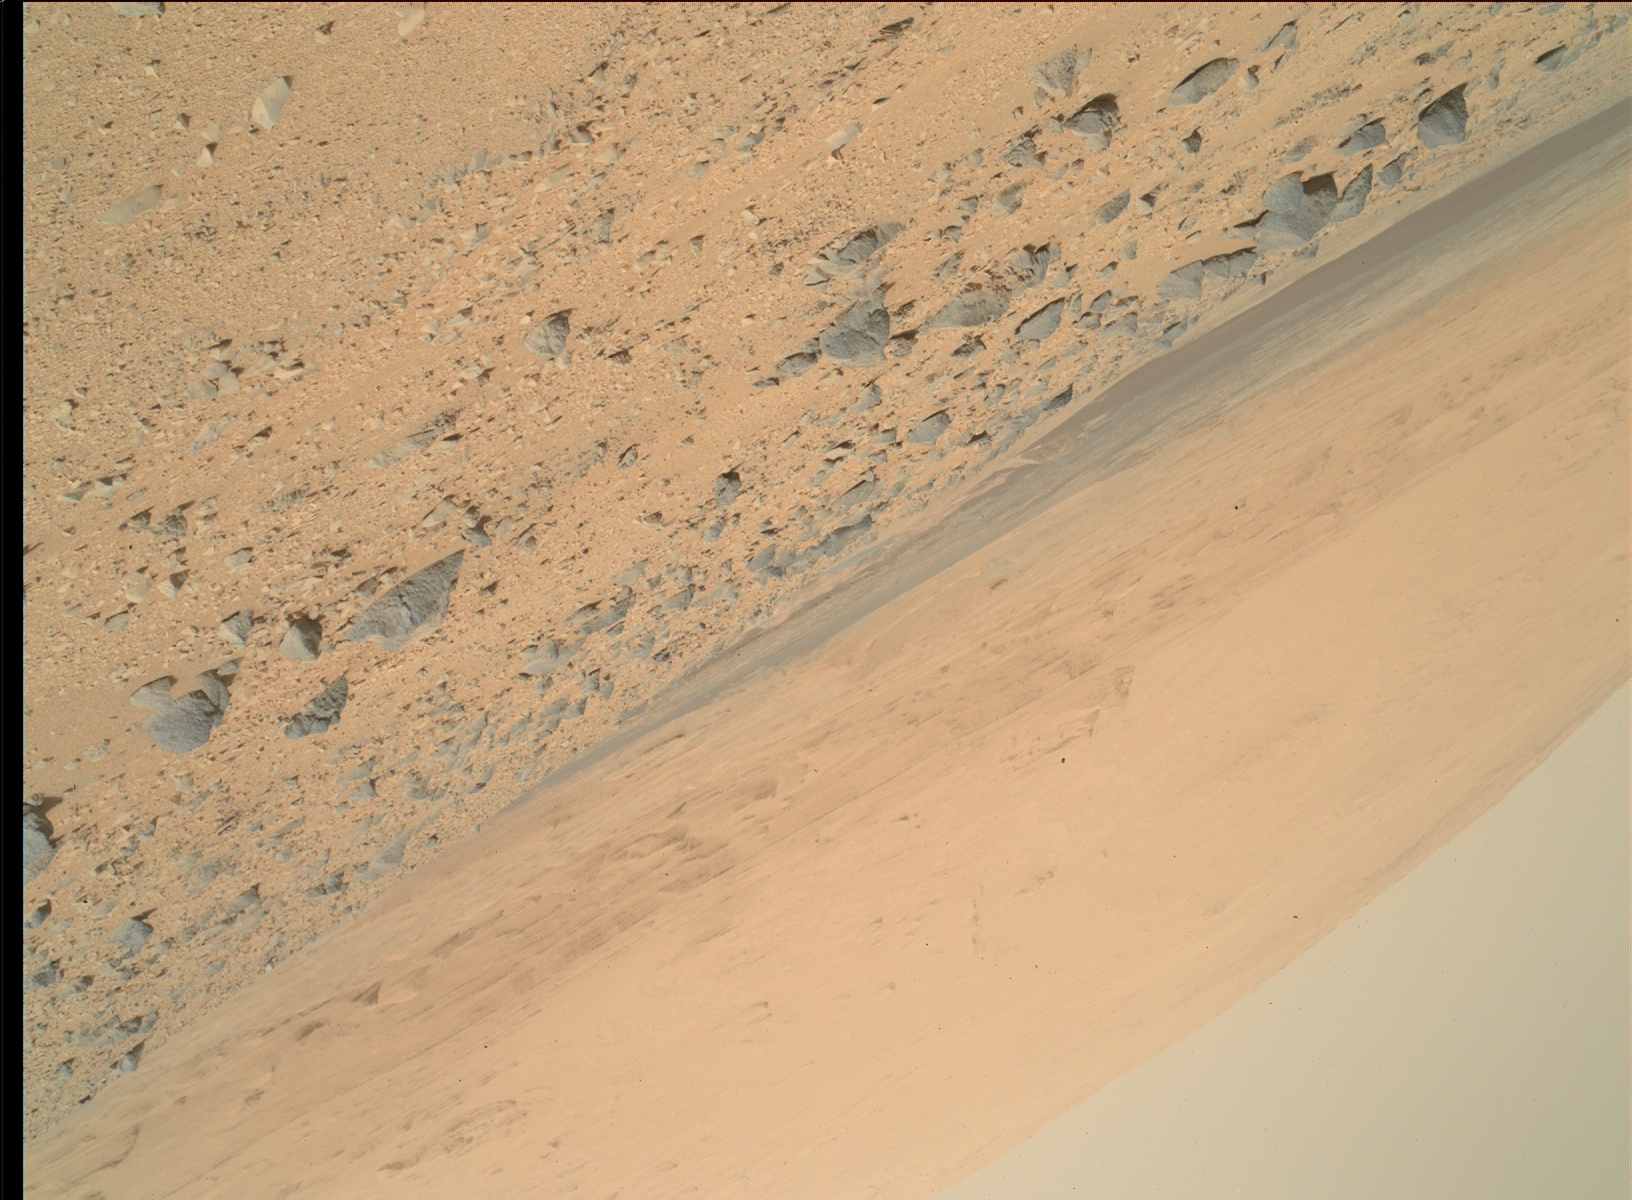 Nasa's Mars rover Curiosity acquired this image using its Mars Hand Lens Imager (MAHLI) on Sol 329